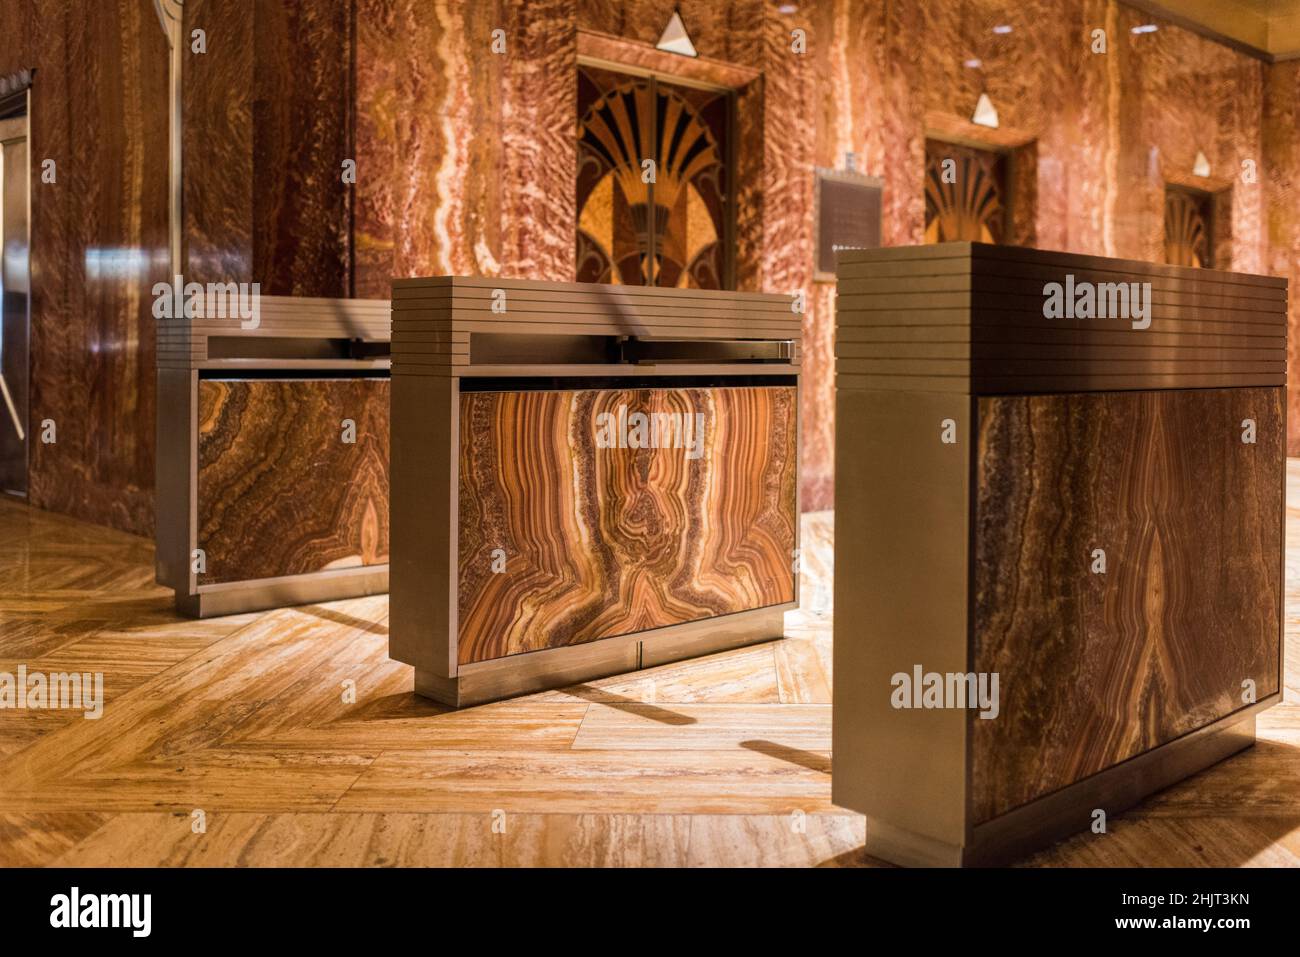 New York City, New York, USA - August 12, 2019: Marble and wood interior details of Chrysler building. Stock Photo